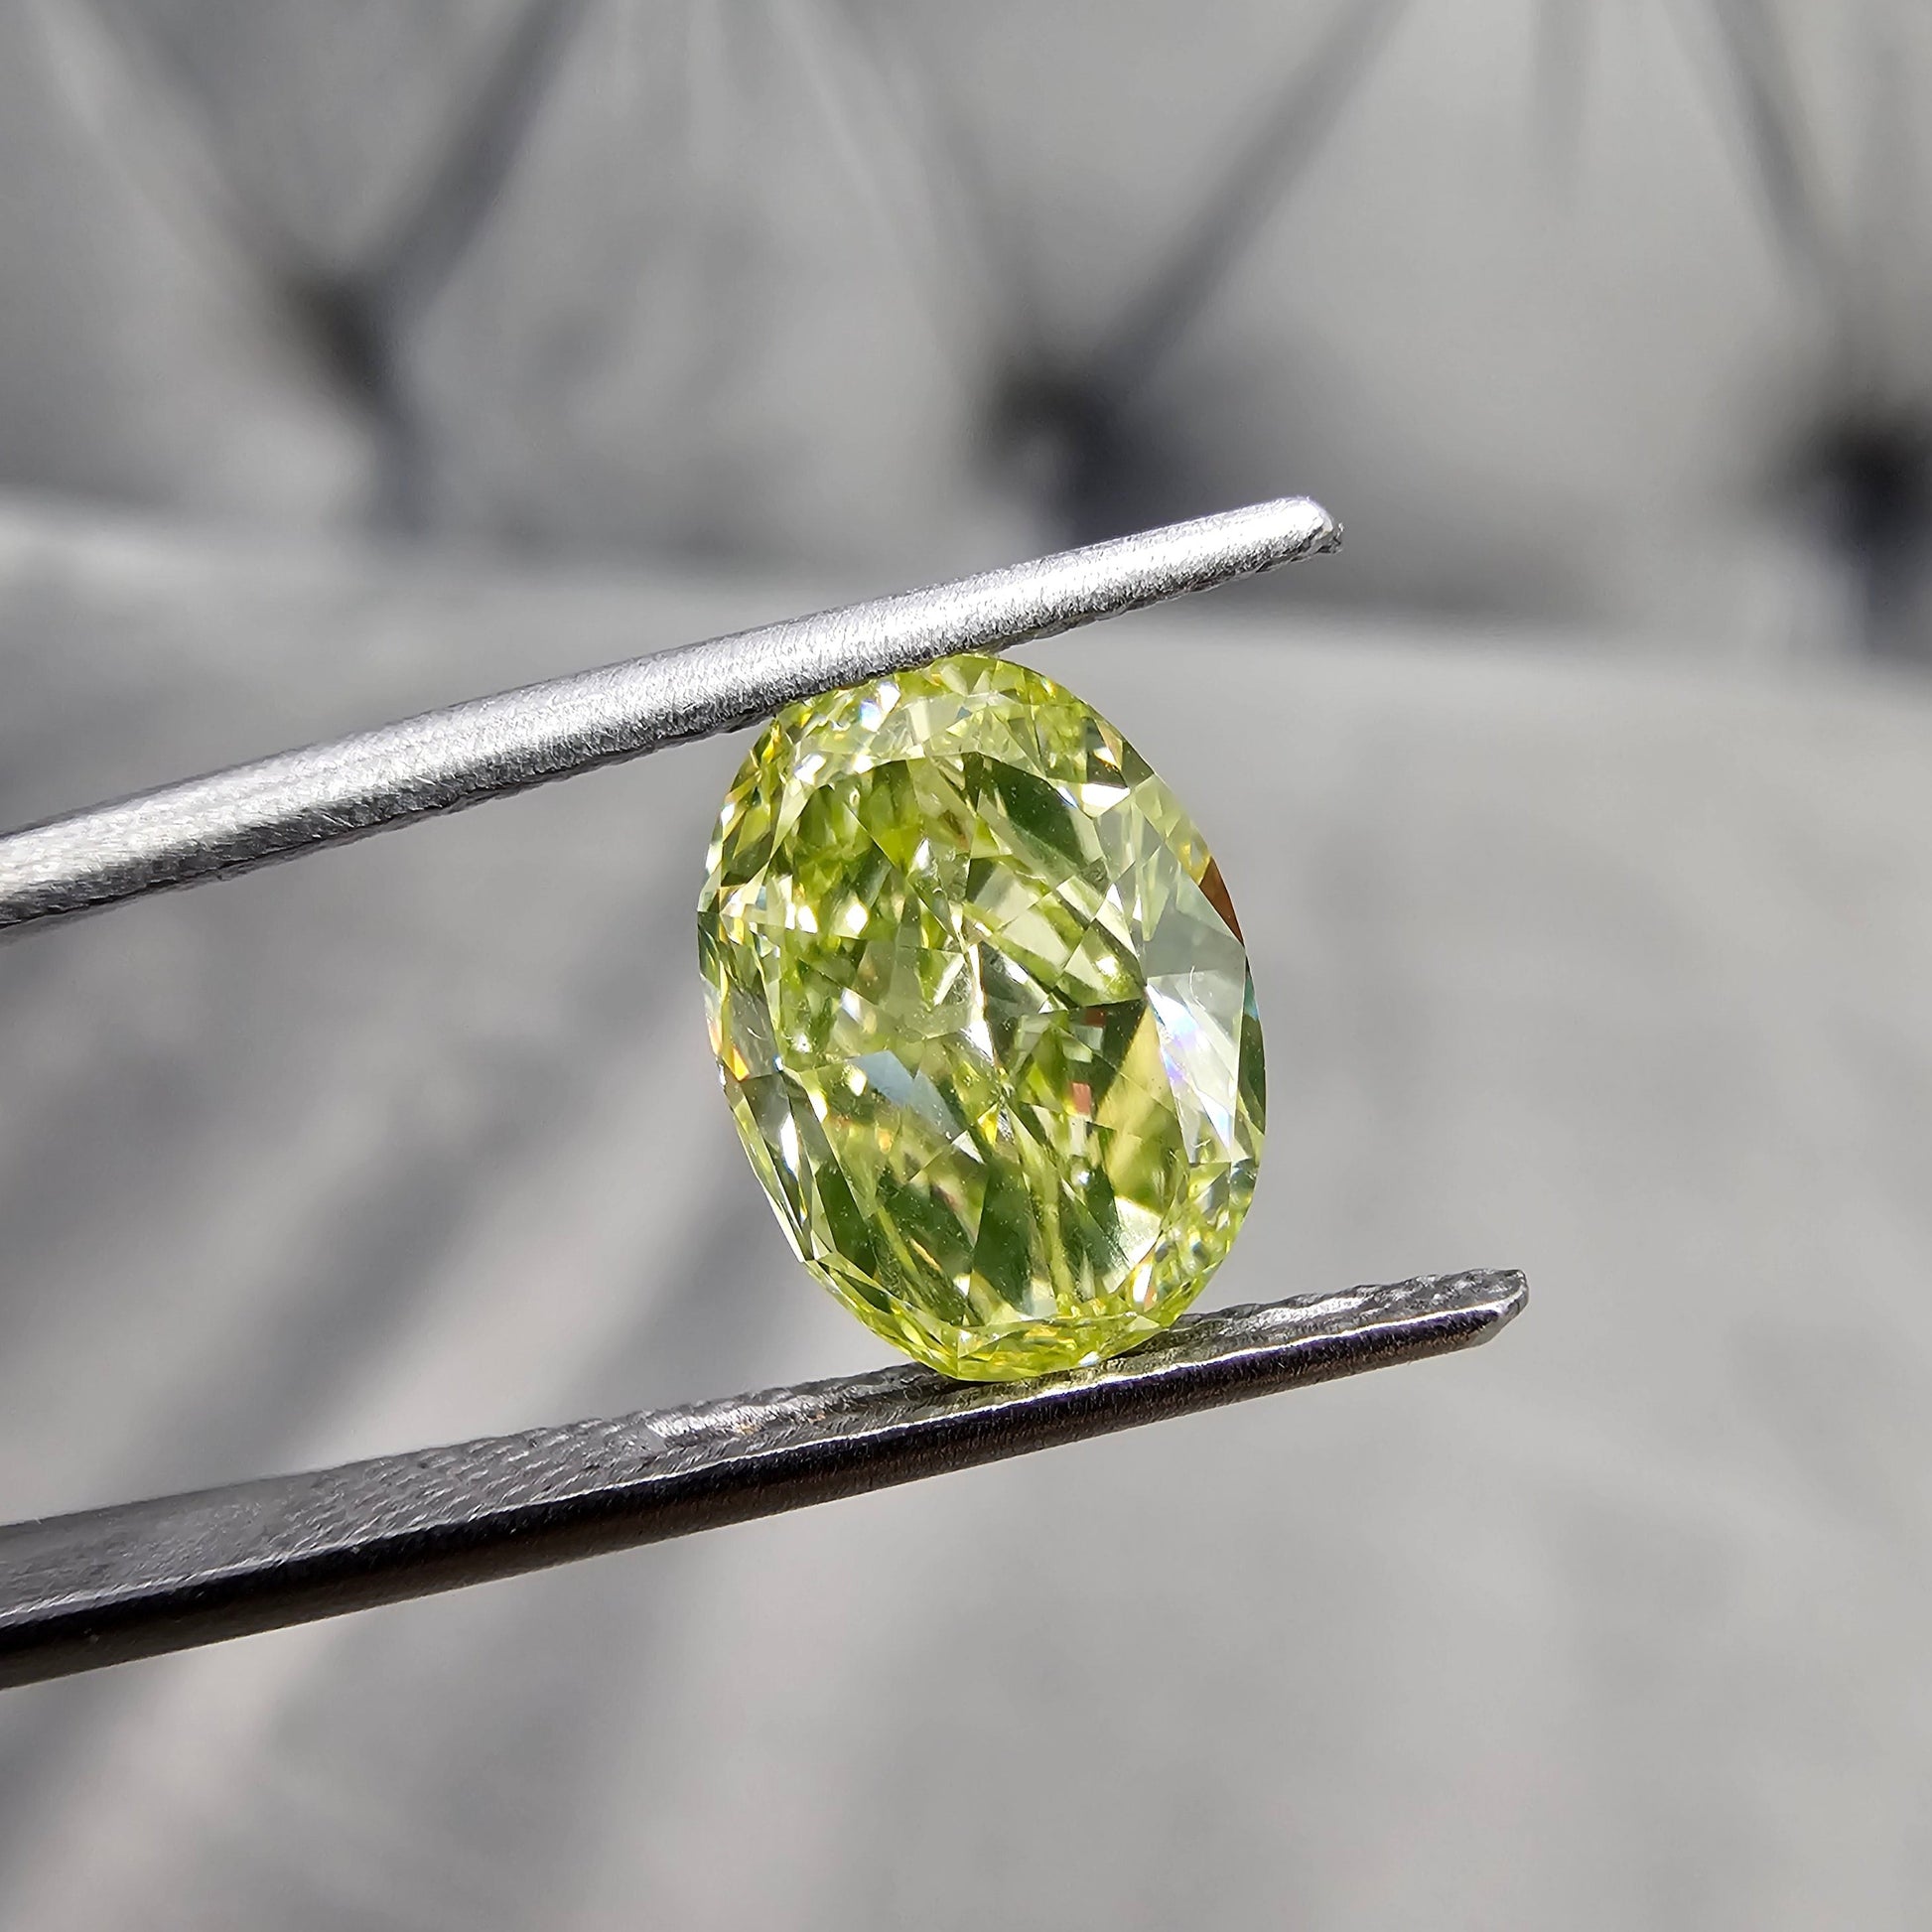 2.43 Carats Total Fancy Intense Green-Yellow Oval Diamond VS1 Clarity " Strong Green Fluorescence" Giving it the desired NEON green color  GIA Certified Diamond 